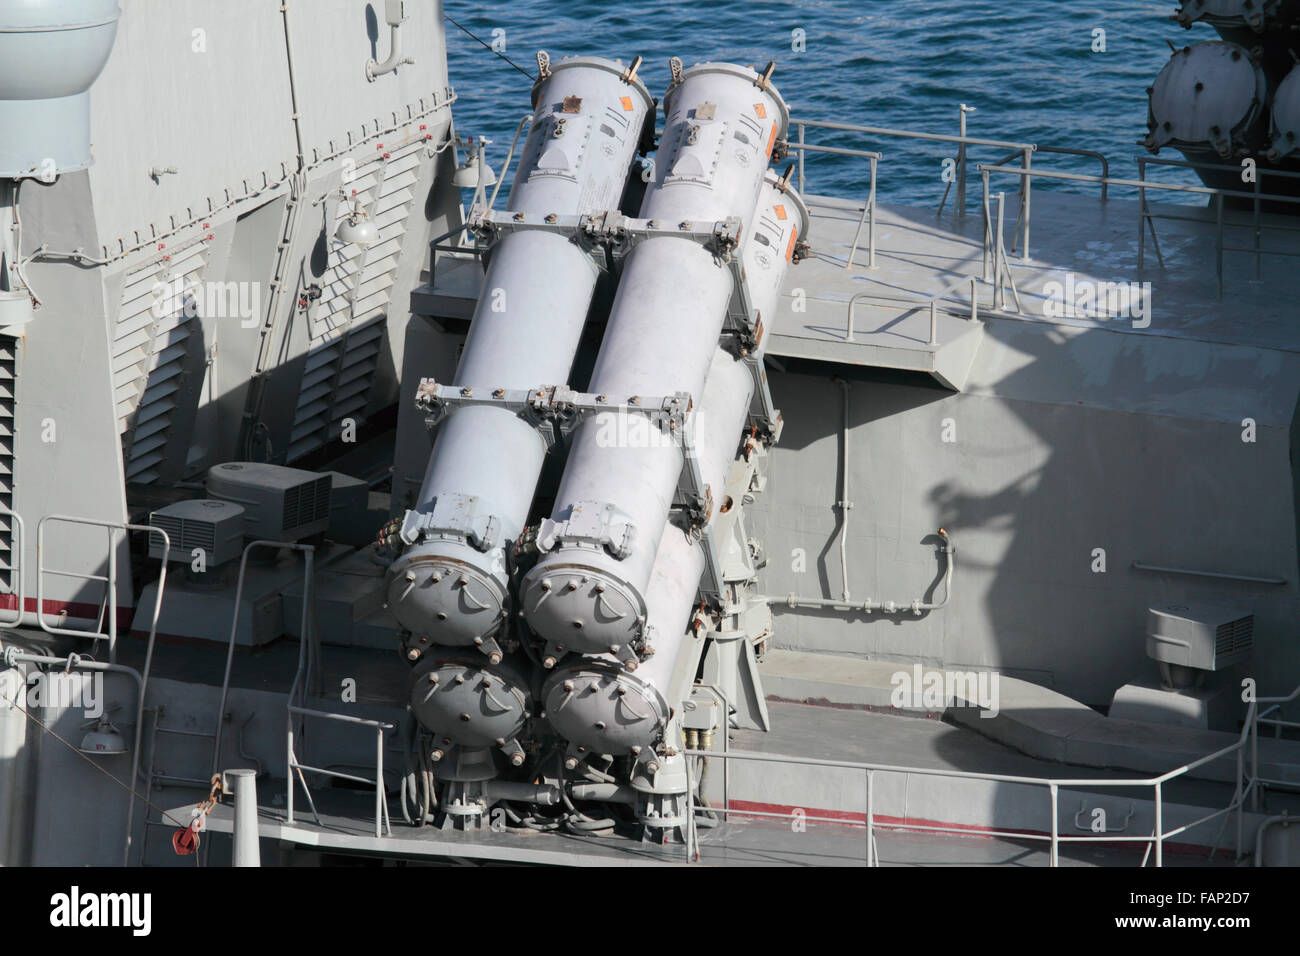 Kh-35 Uran or Switchblade anti-ship missile launch canisters on board the Russian Navy frigate Yaroslav Mudry Stock Photo